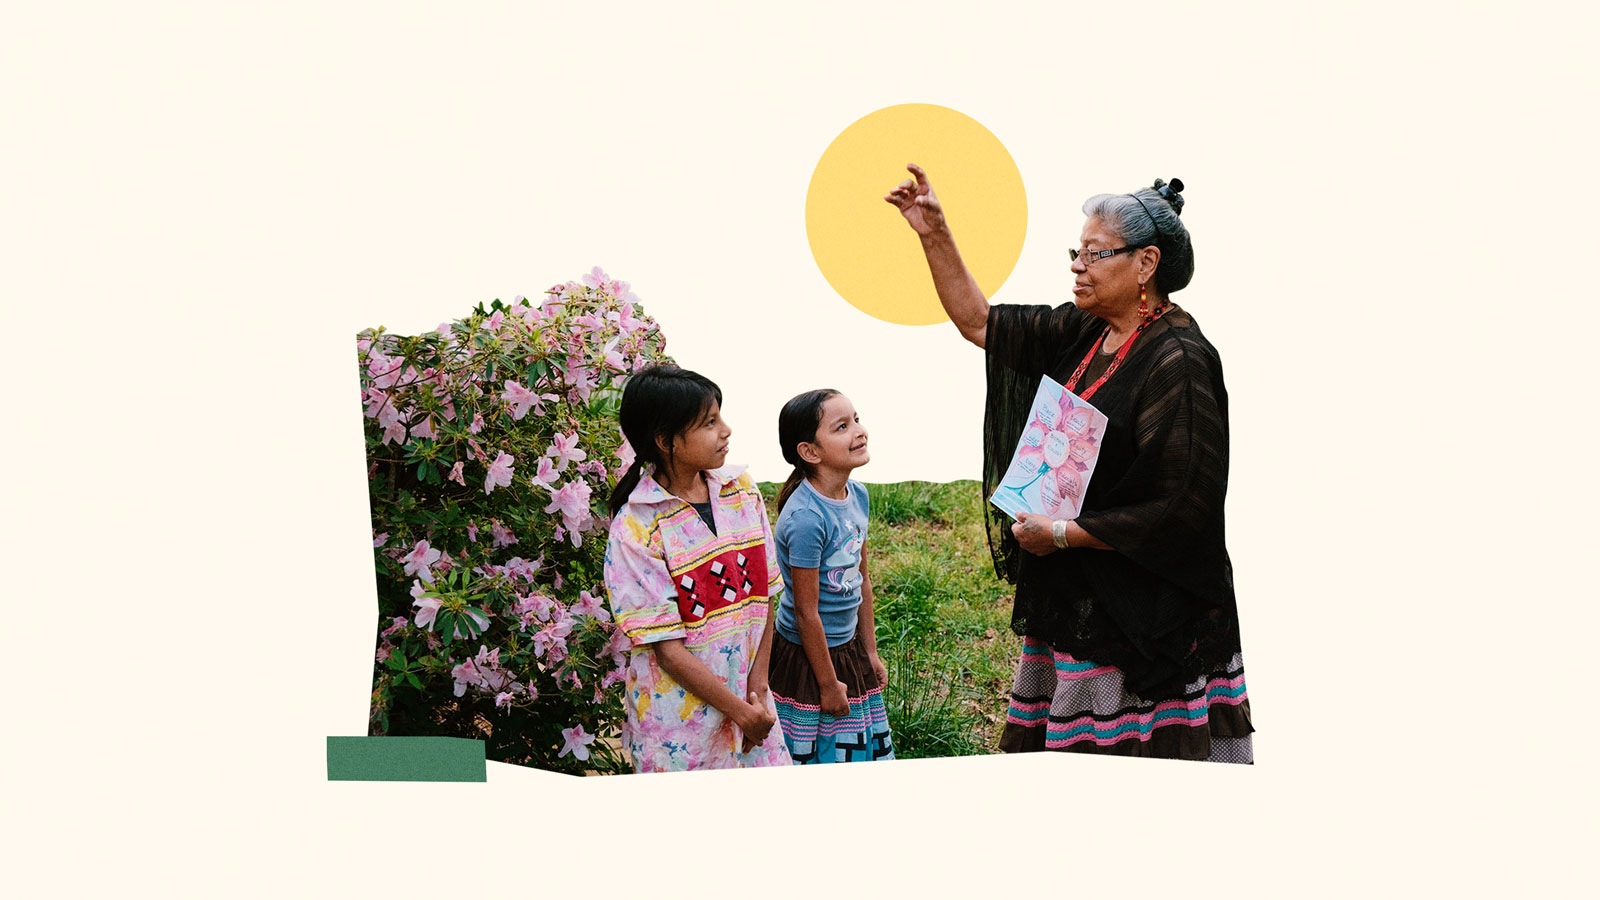 Older person teaching children about meaning of 7 petals in Maskoke language